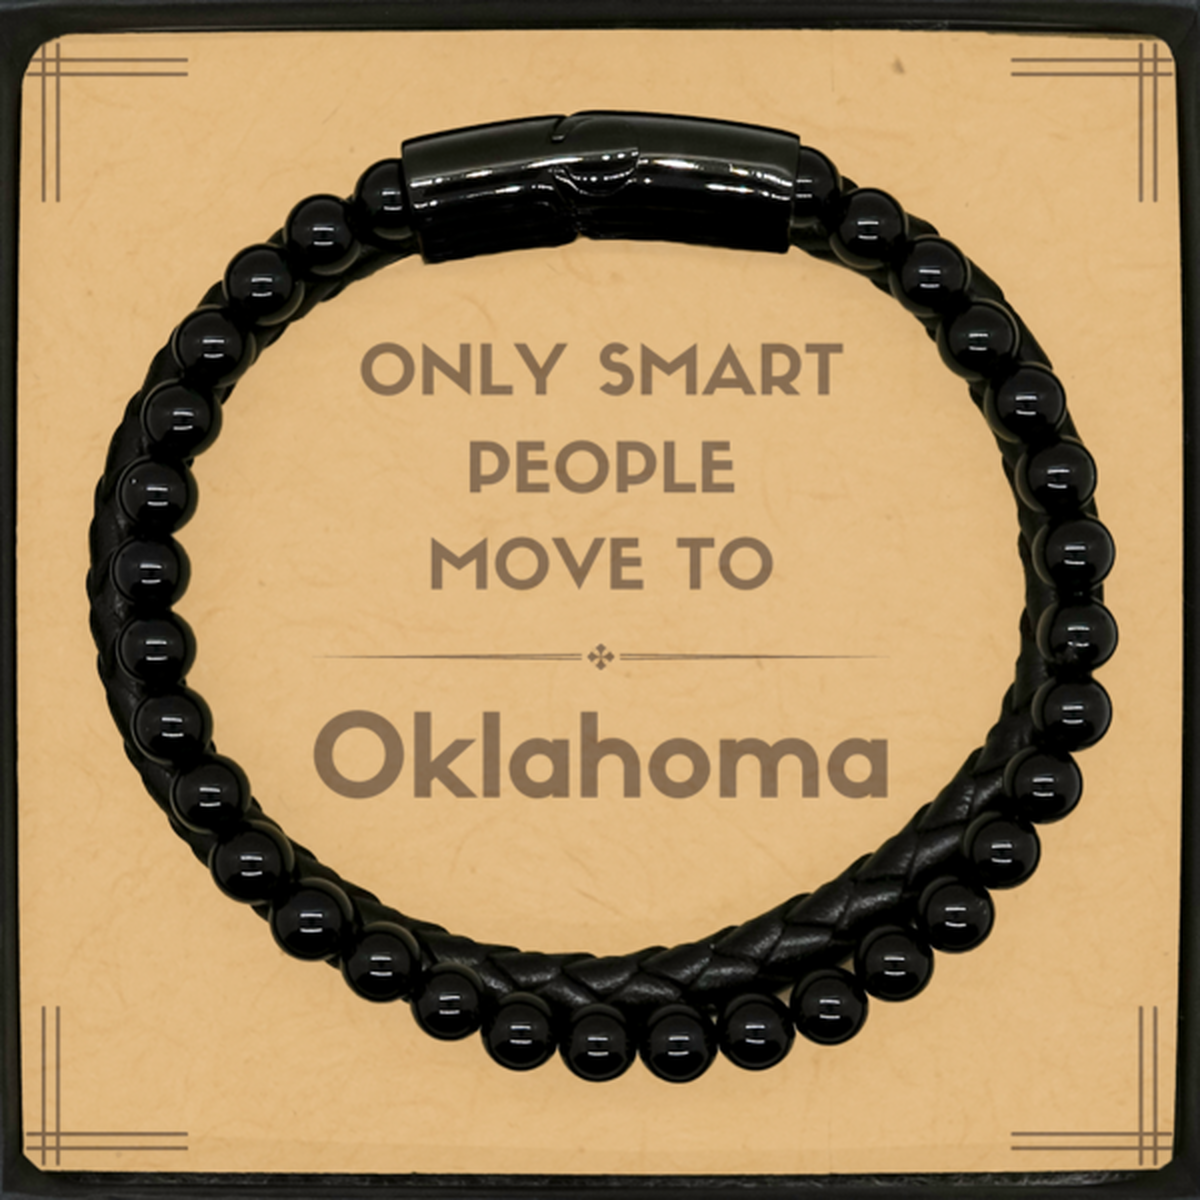 Only smart people move to Oklahoma Stone Leather Bracelets, Message Card Gifts For Oklahoma, Move to Oklahoma Gifts for Friends Coworker Funny Saying Quote